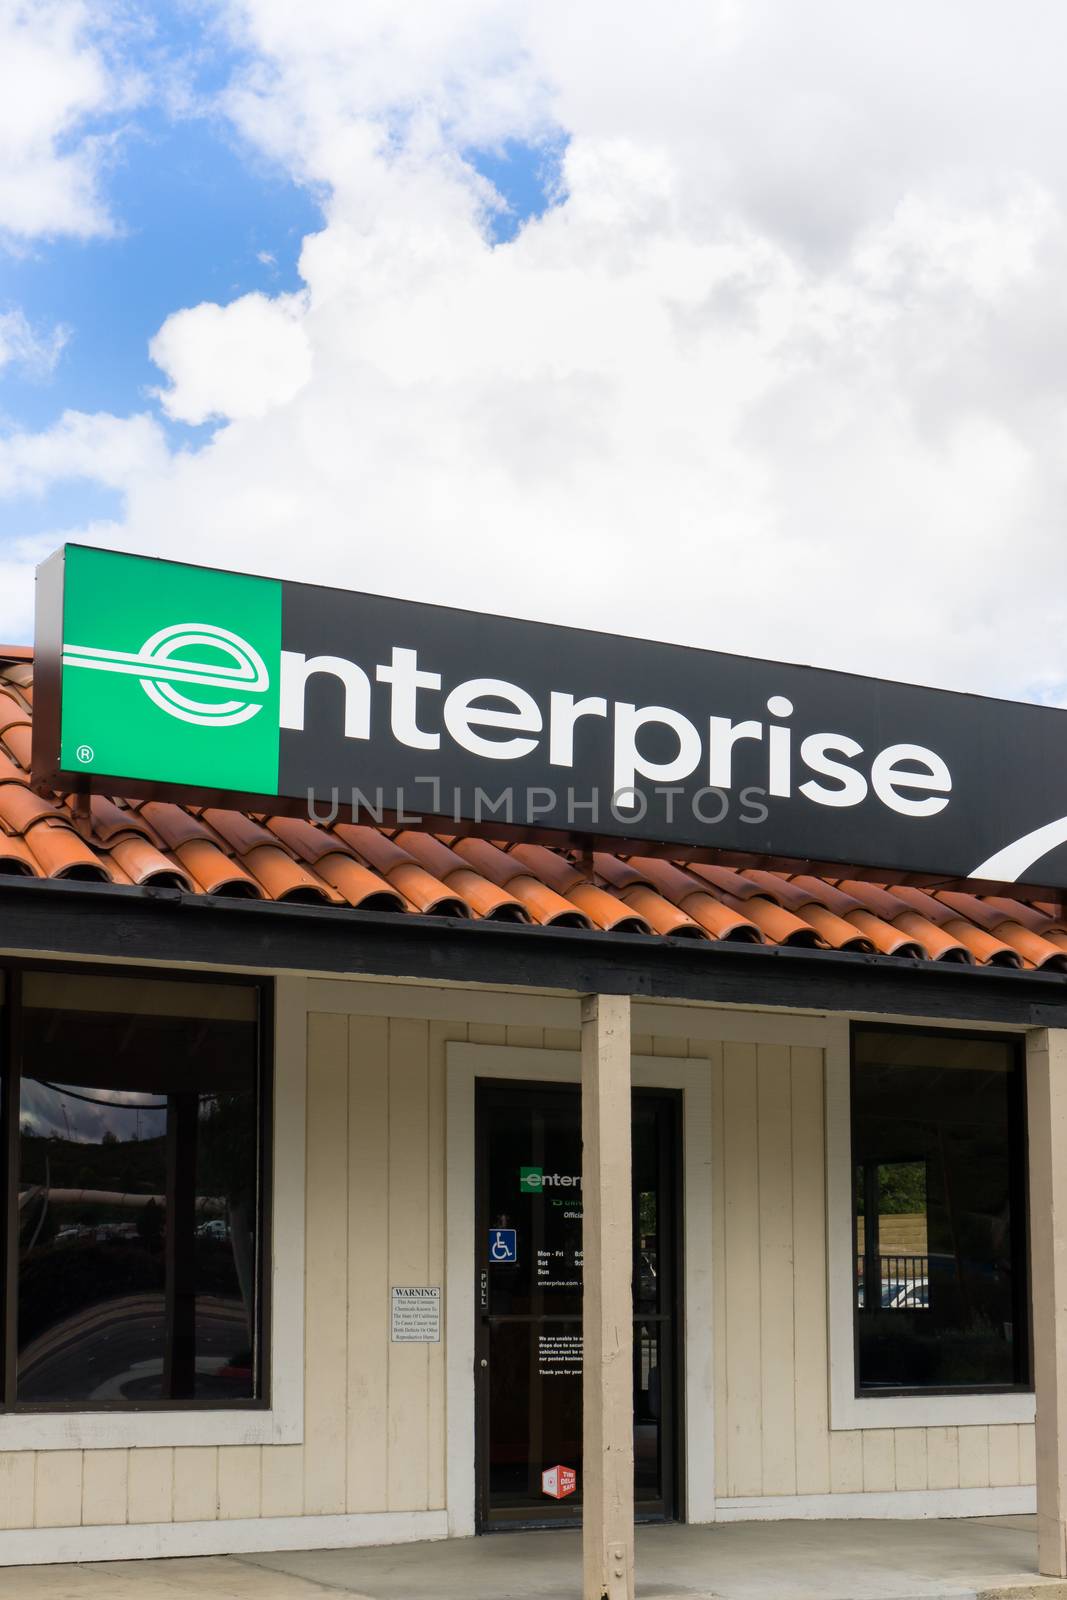 SANTA CLARITA, CA/USA - MARCH 1, 2015: Enterprise car rental front and sign vertical image. Enterprise Rent-A-Car is a car rental company headquartered in the United States.